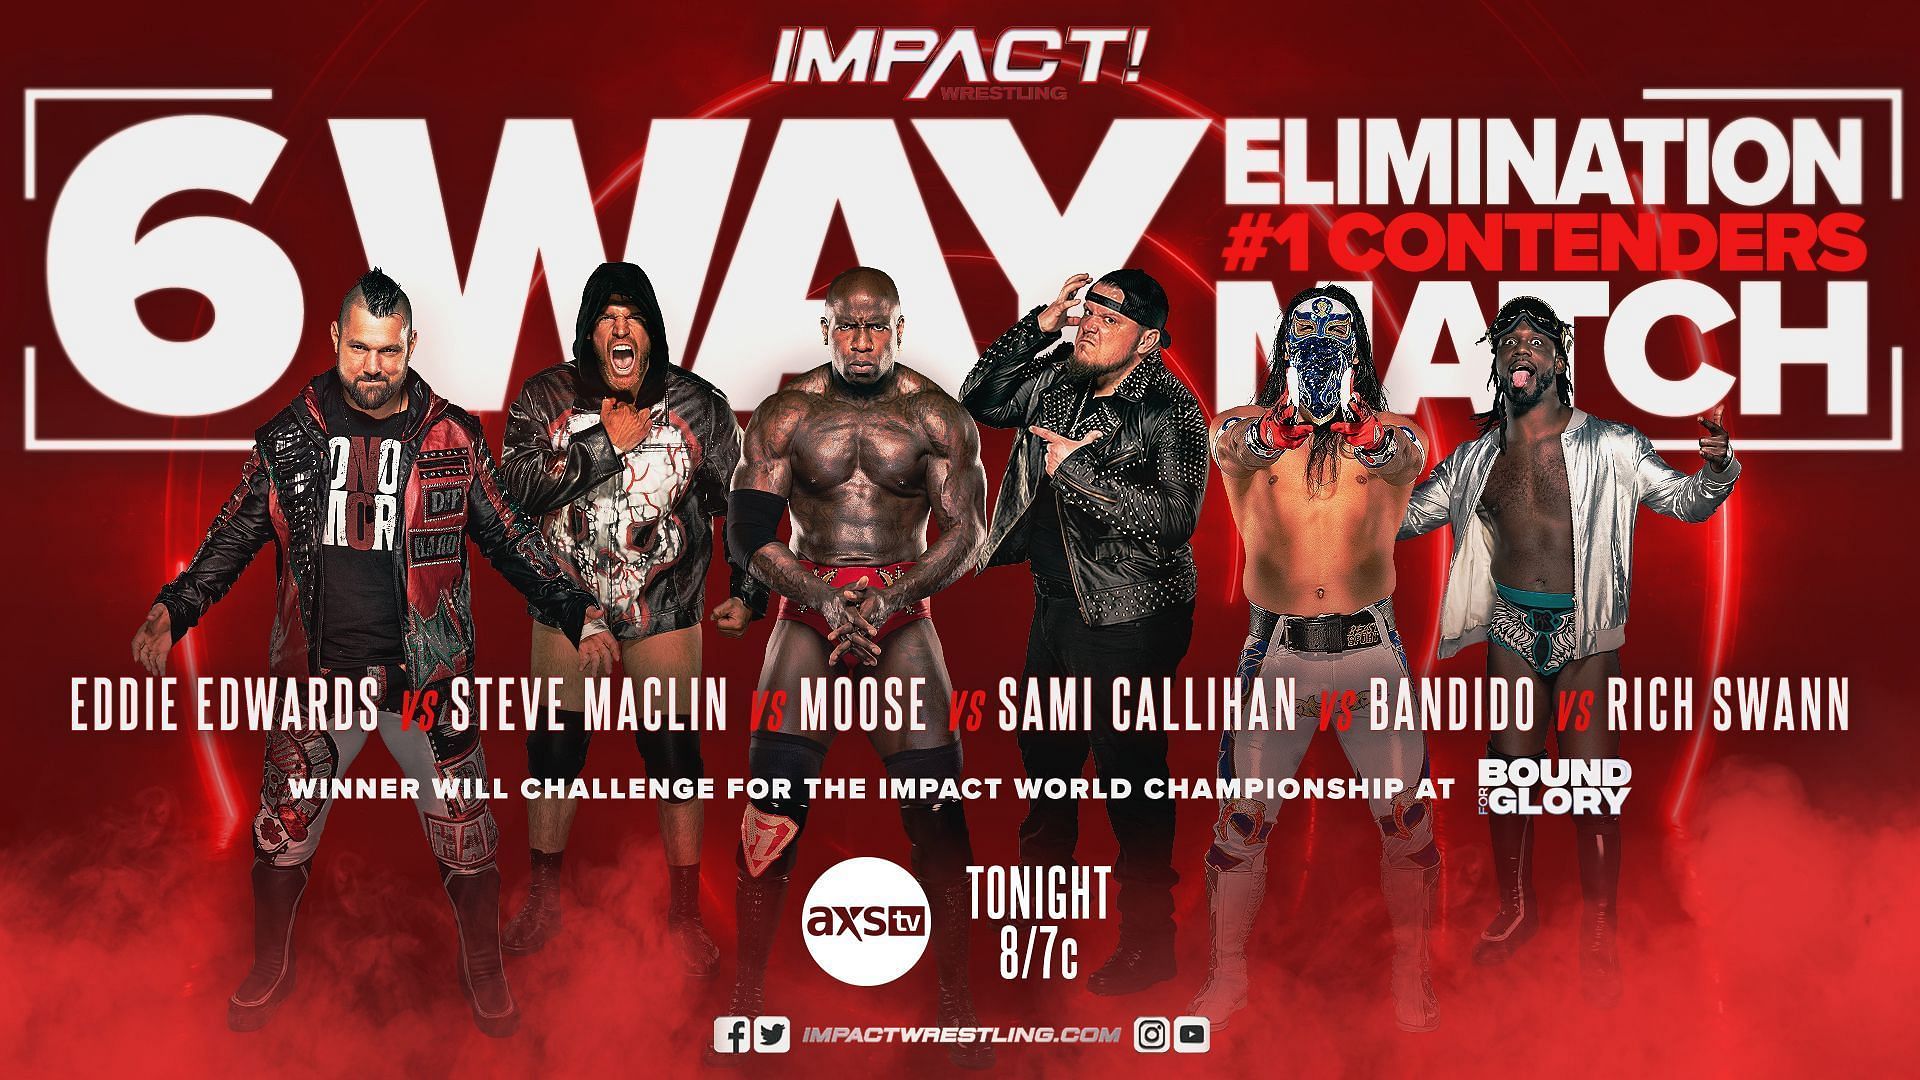 IMPACT Wrestling featured a blockbuster main event to crown the #1 Contender